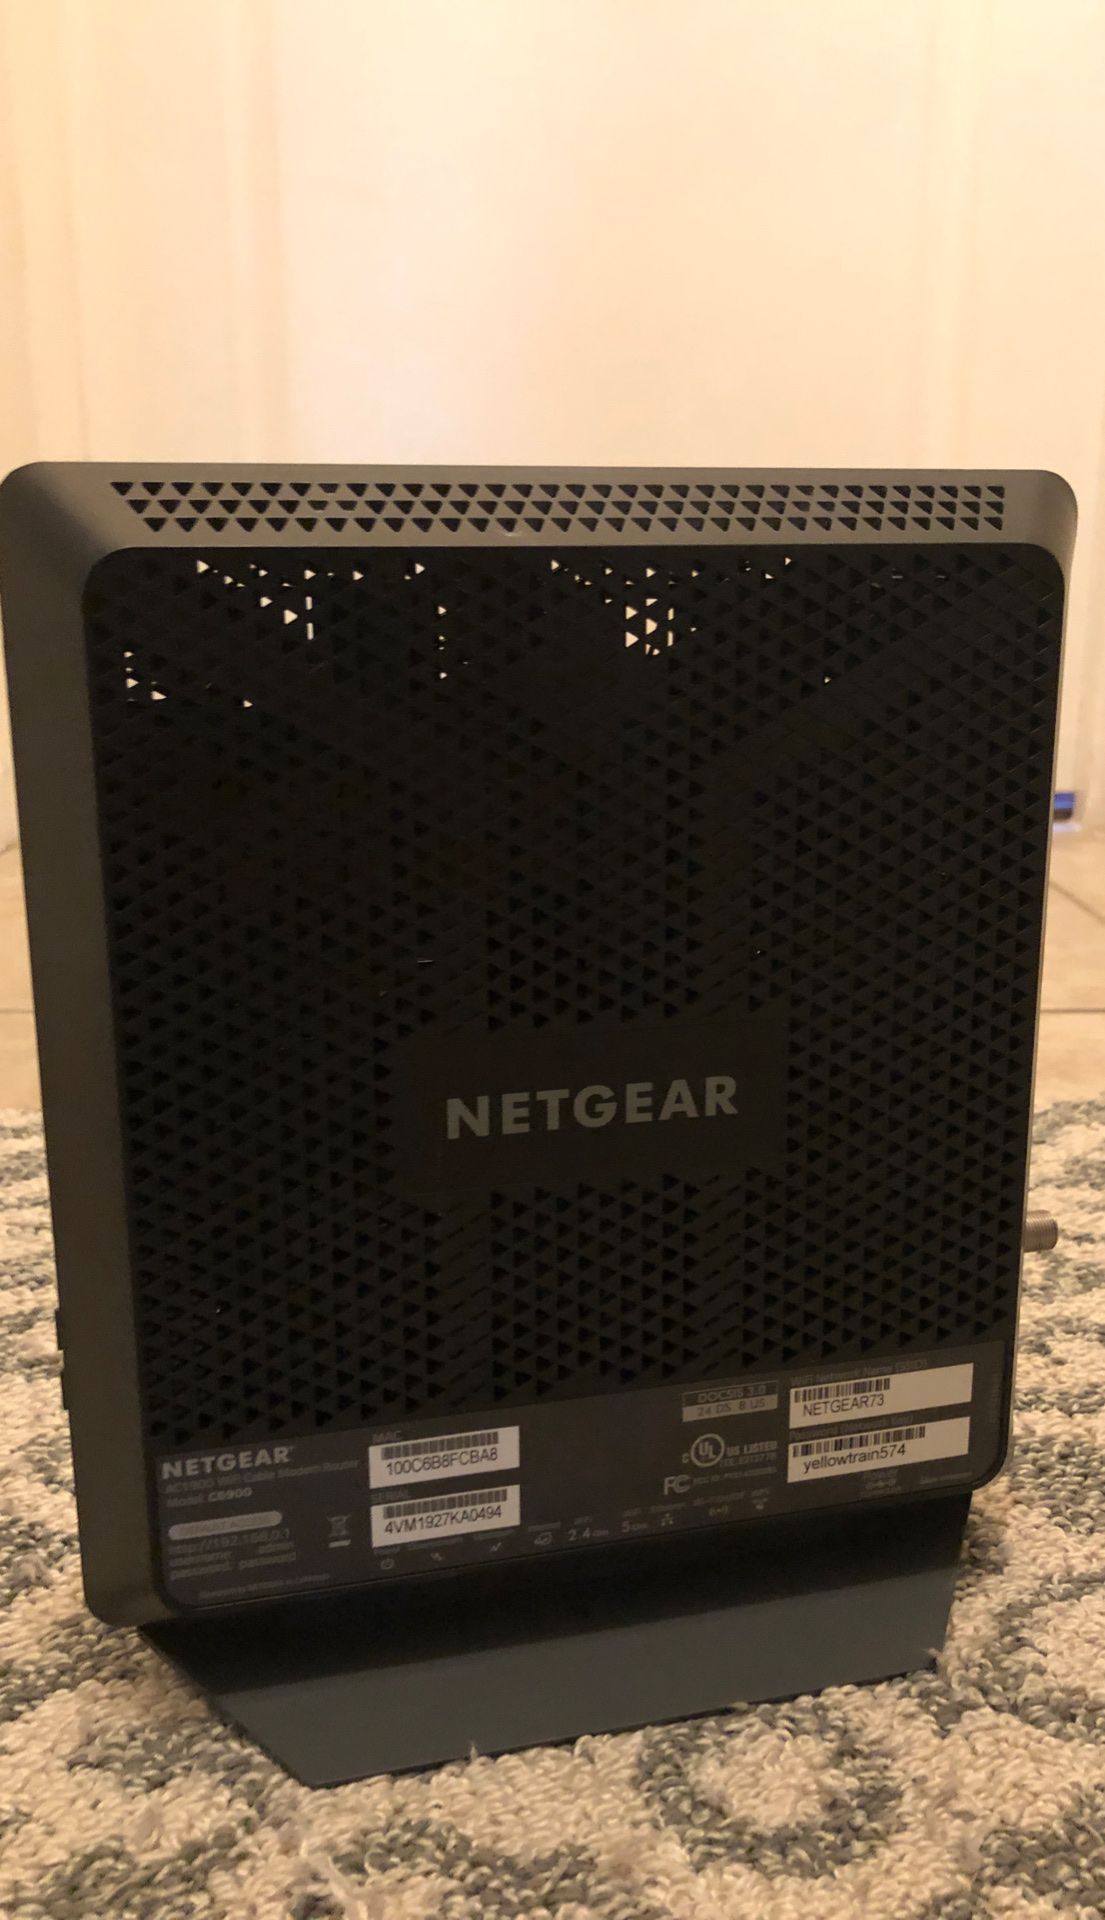 Netgear C6900 WiFi Cable Modem Router Like New No Box